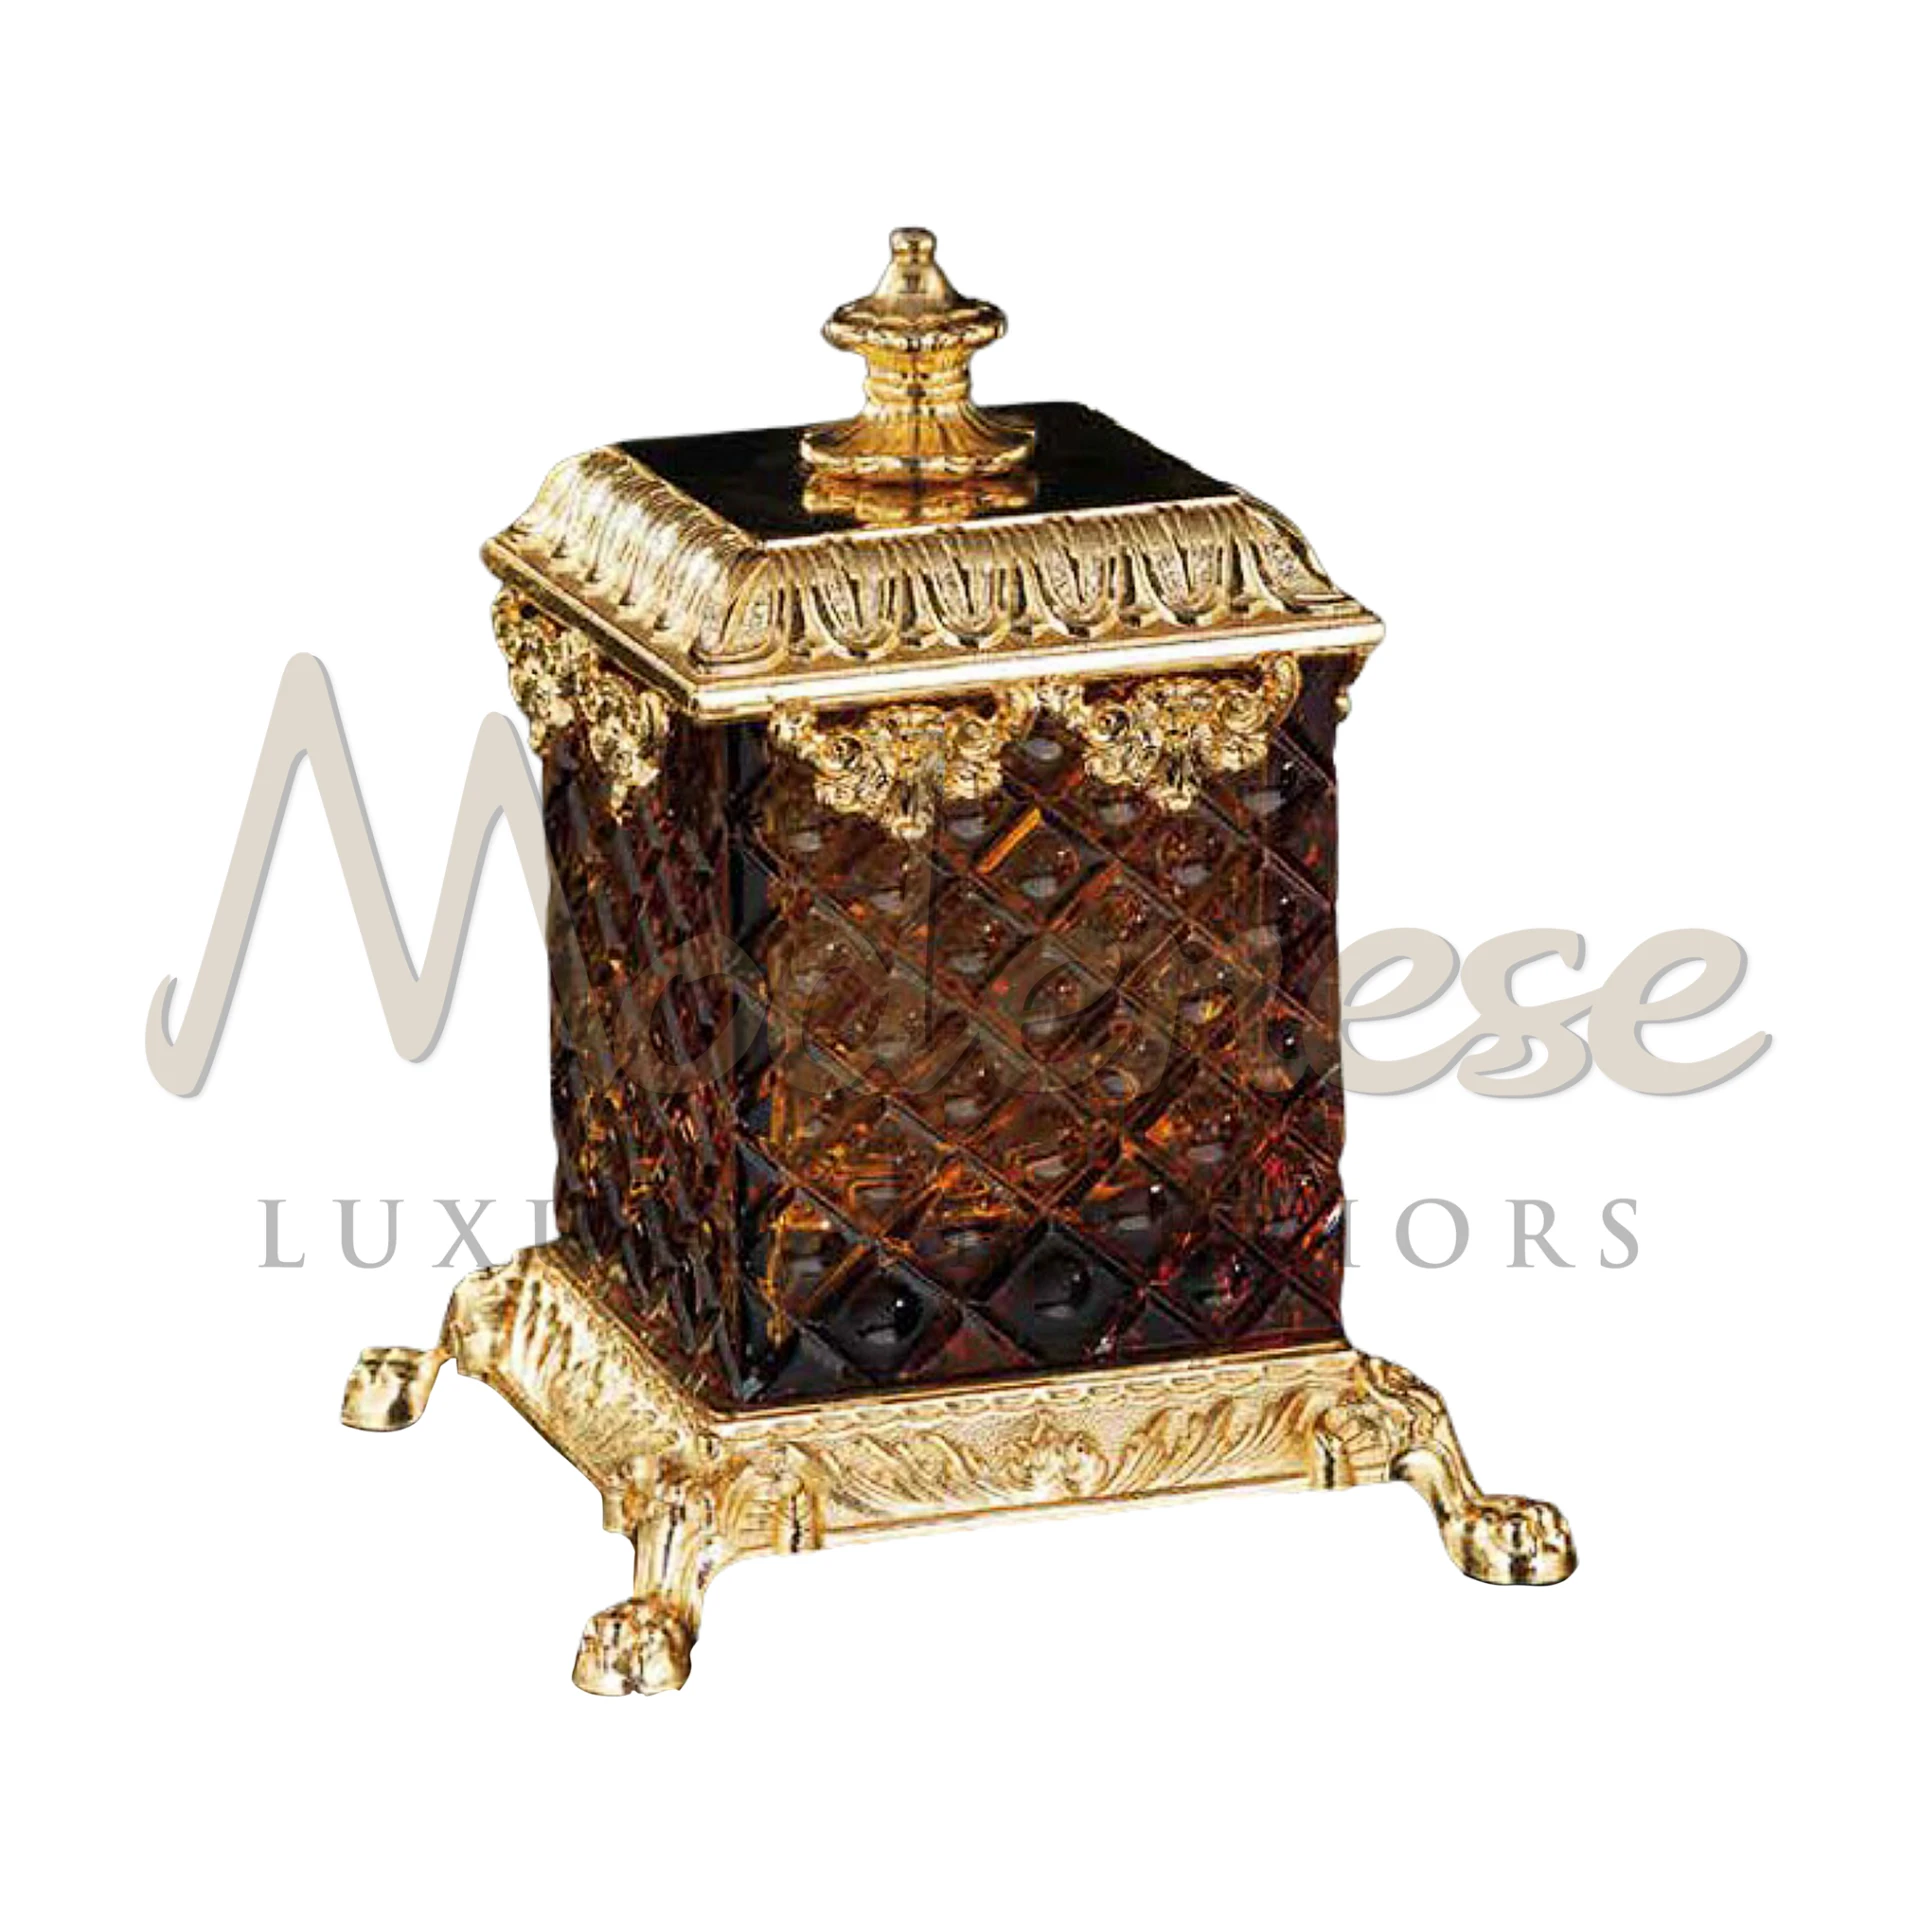 Handcrafted Royal Crystal Box, epitome of luxury and classic design, ideal for baroque and elegant interior settings.